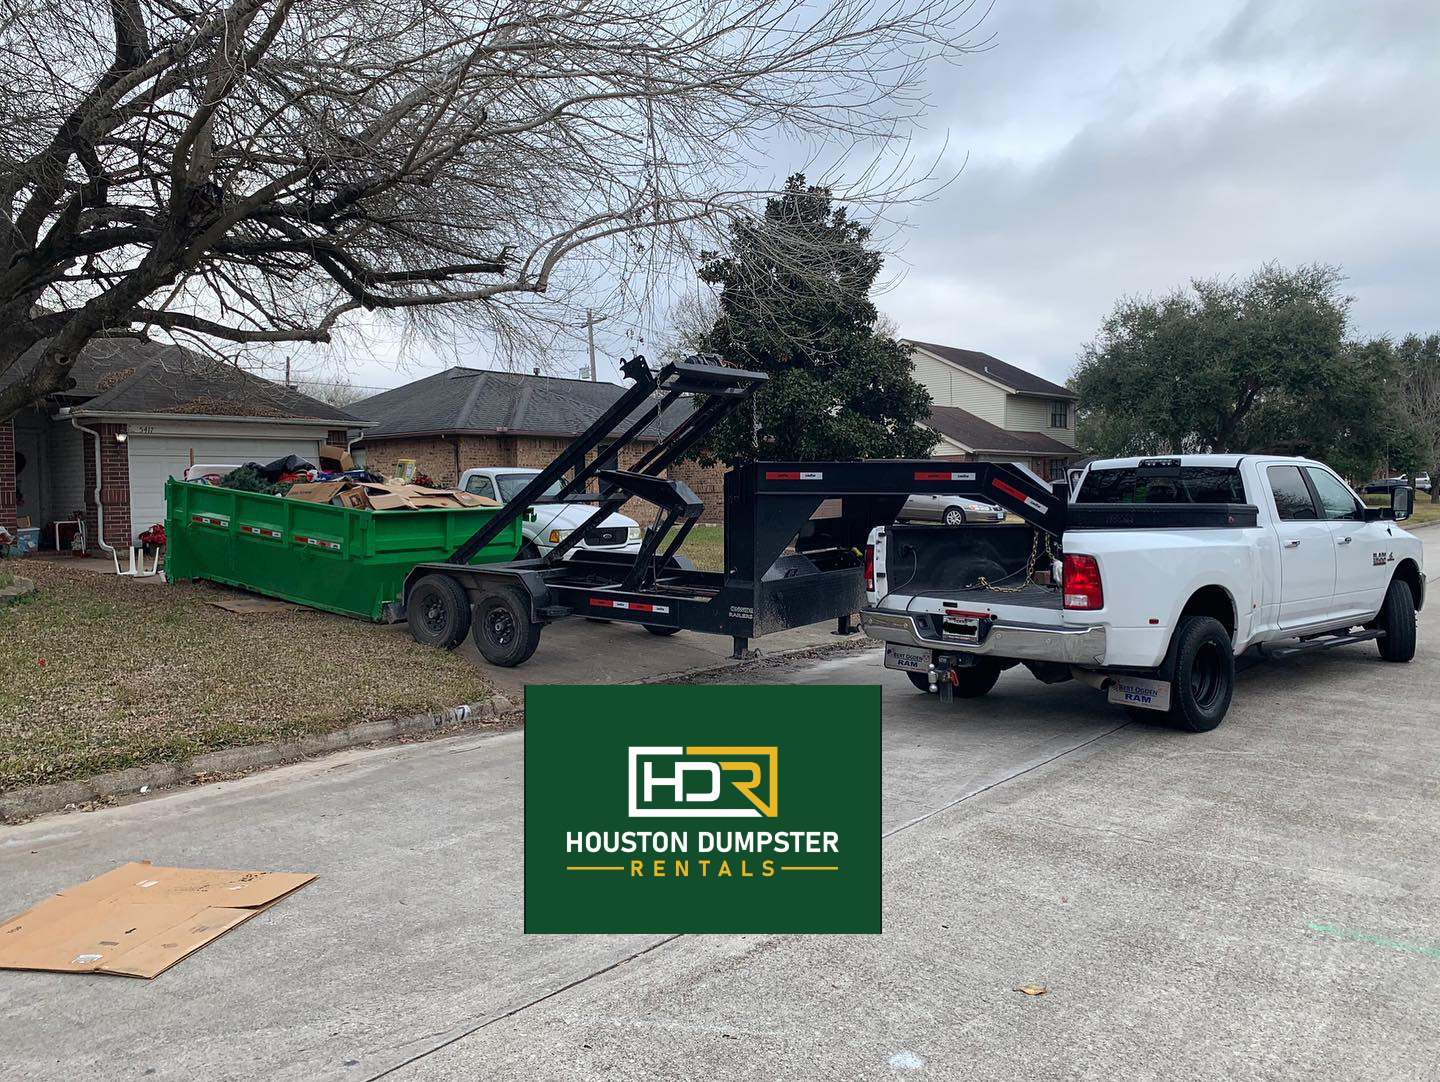 Dumpster Rental HTX Dumpsters Friendswood TX Perfect for Yard Waste